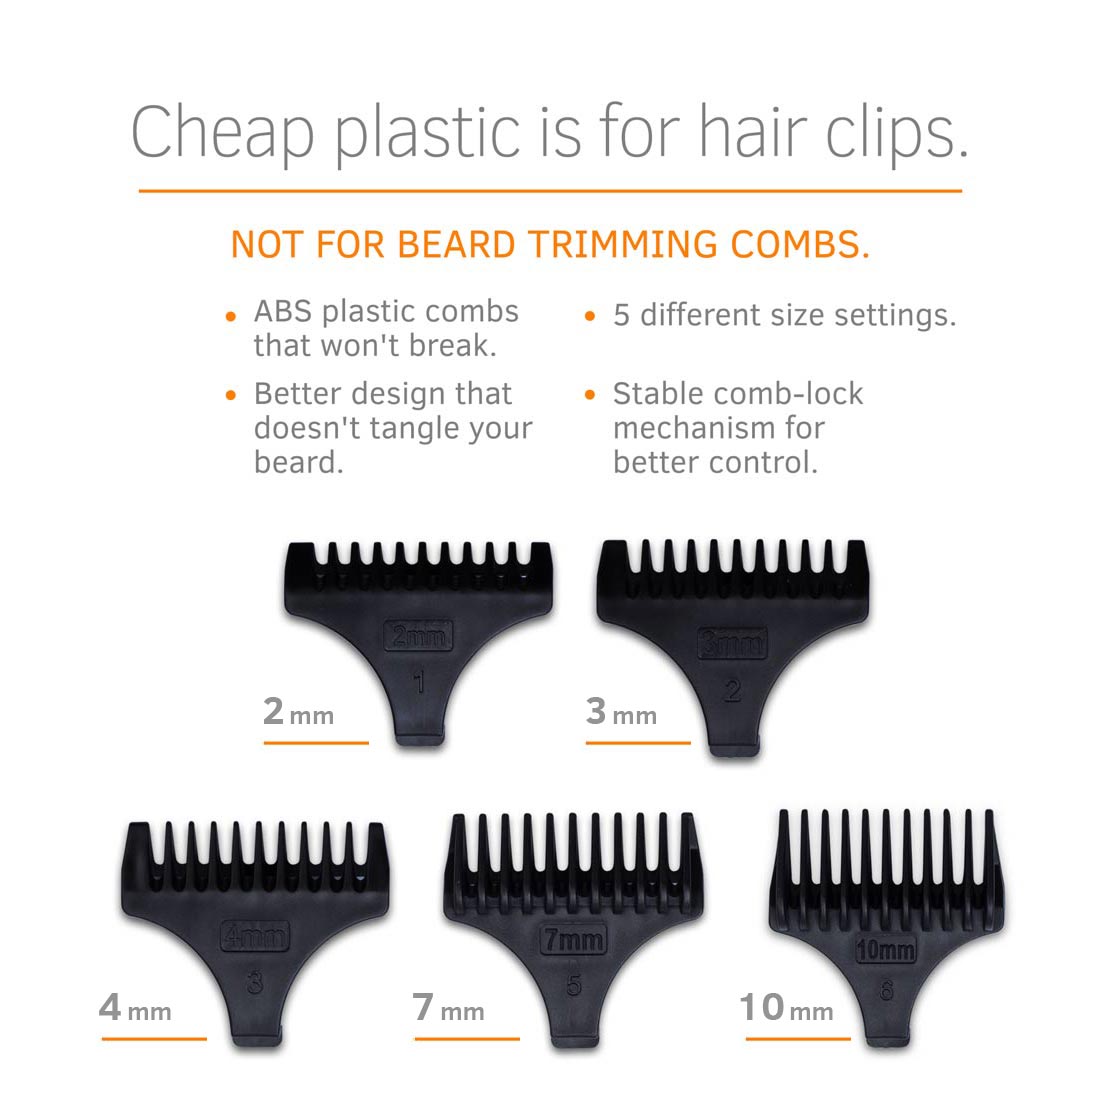 beard trimmer comb sizes